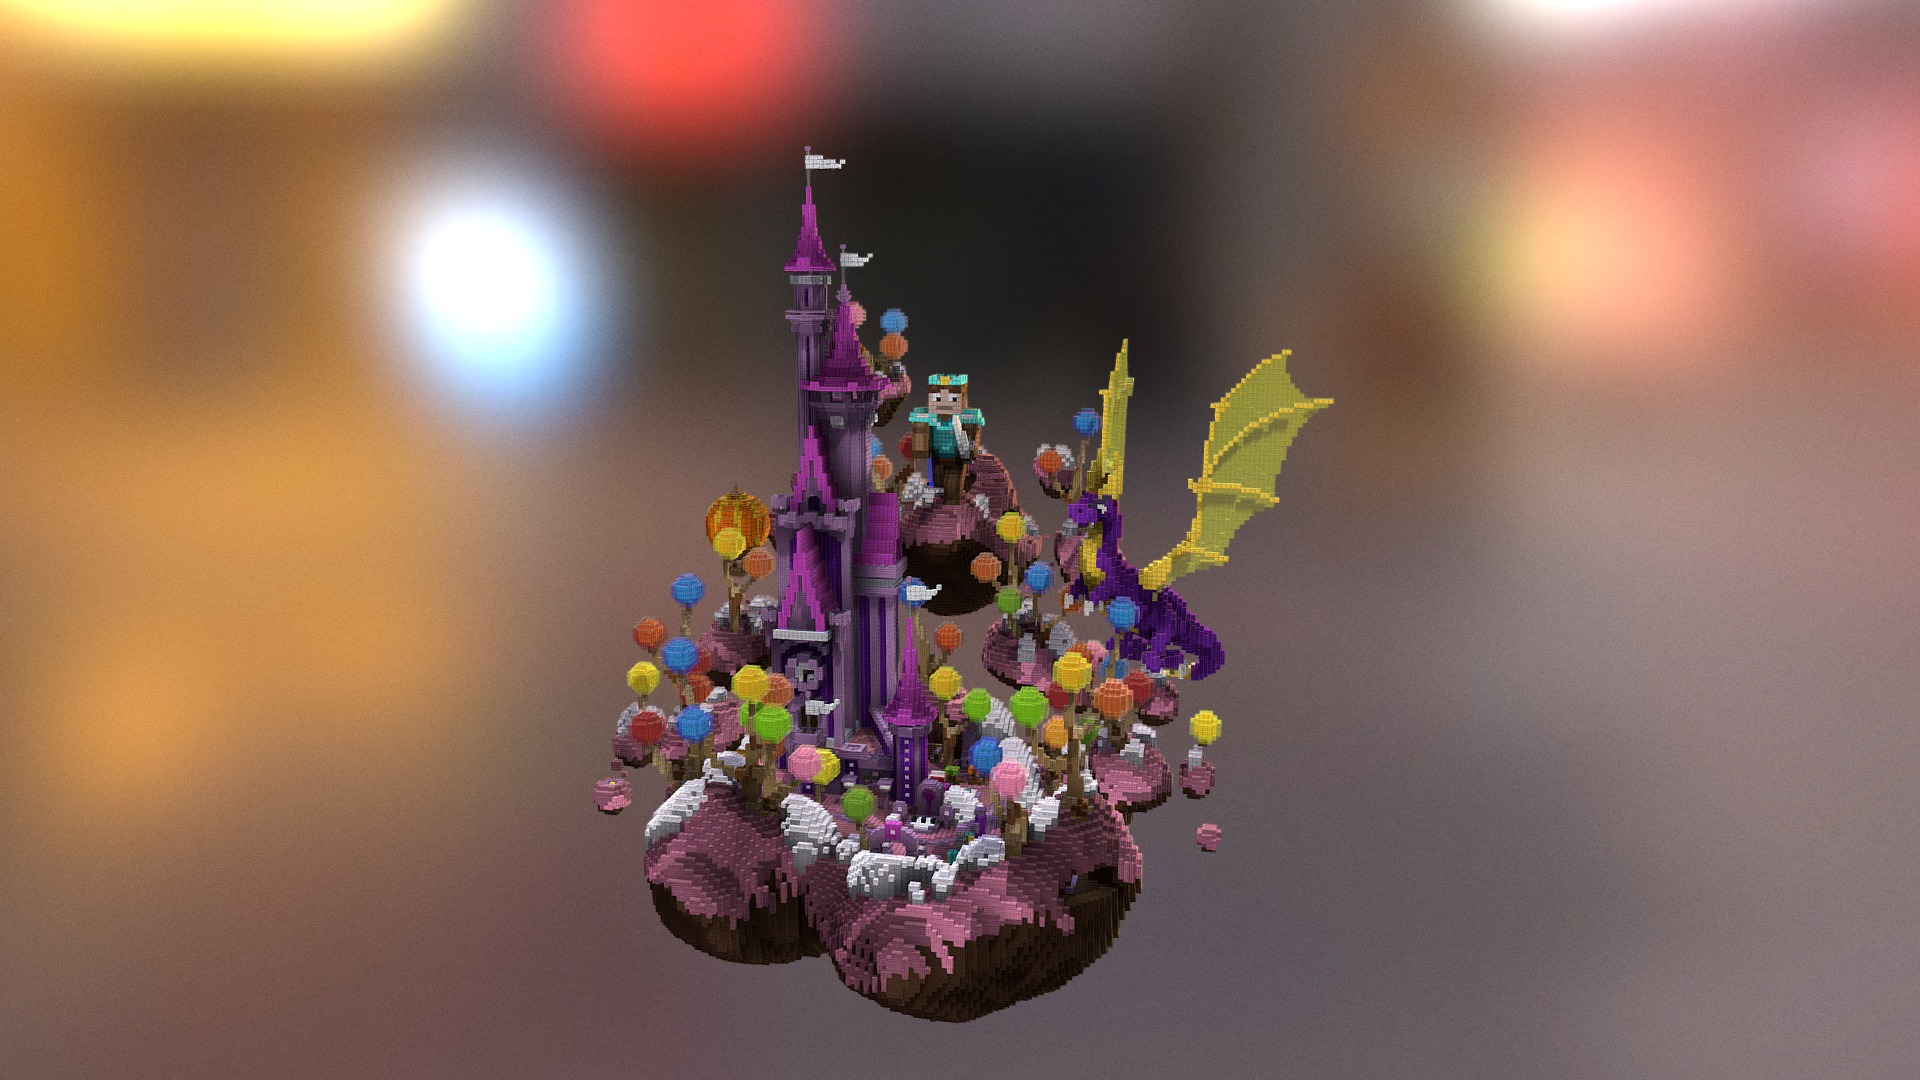 3D model Candy Kingdom Spawn - This is a 3D model of the Candy Kingdom Spawn. The 3D model is about a purple and yellow toy.